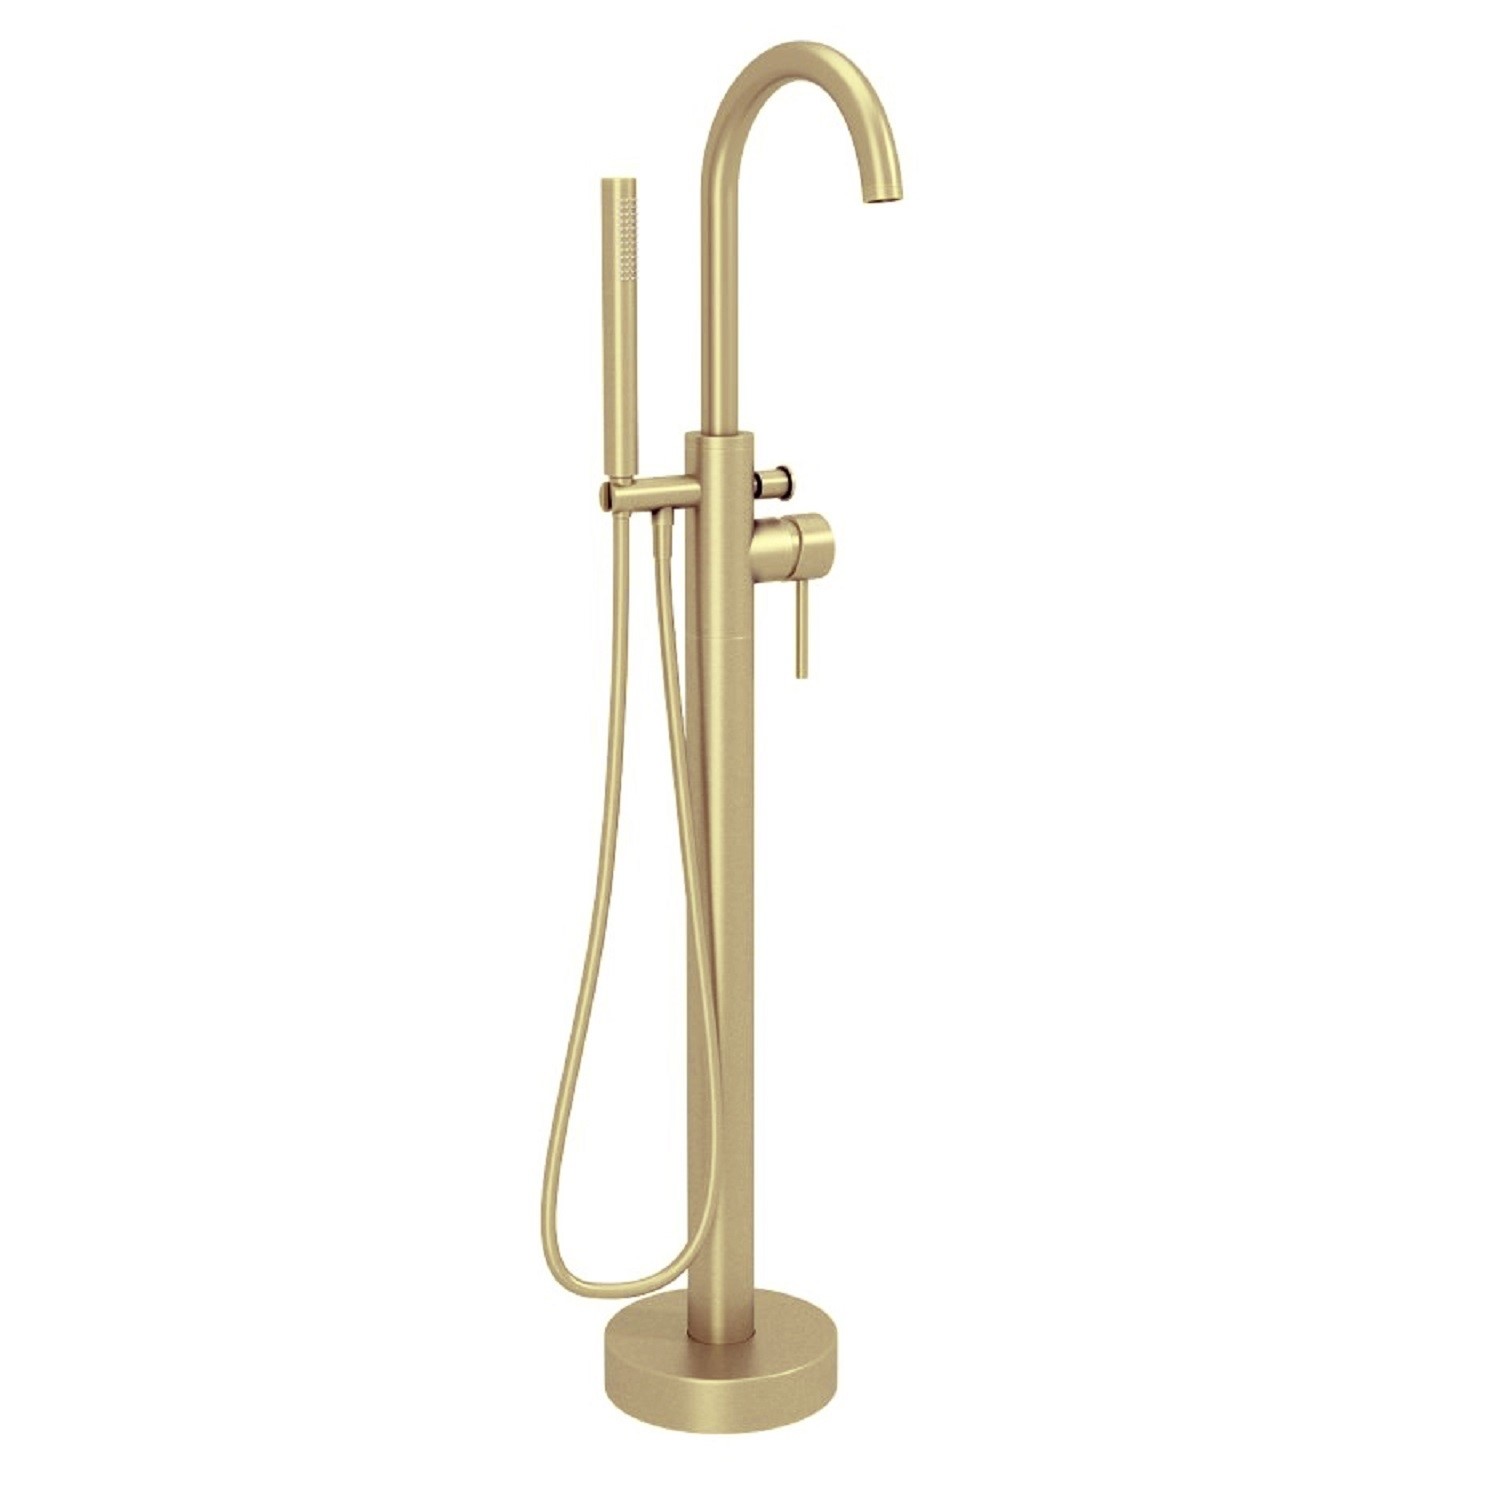 Bath Shower Mixer Tap Single Lever Brass Wall Mounted FREE P&P 2 